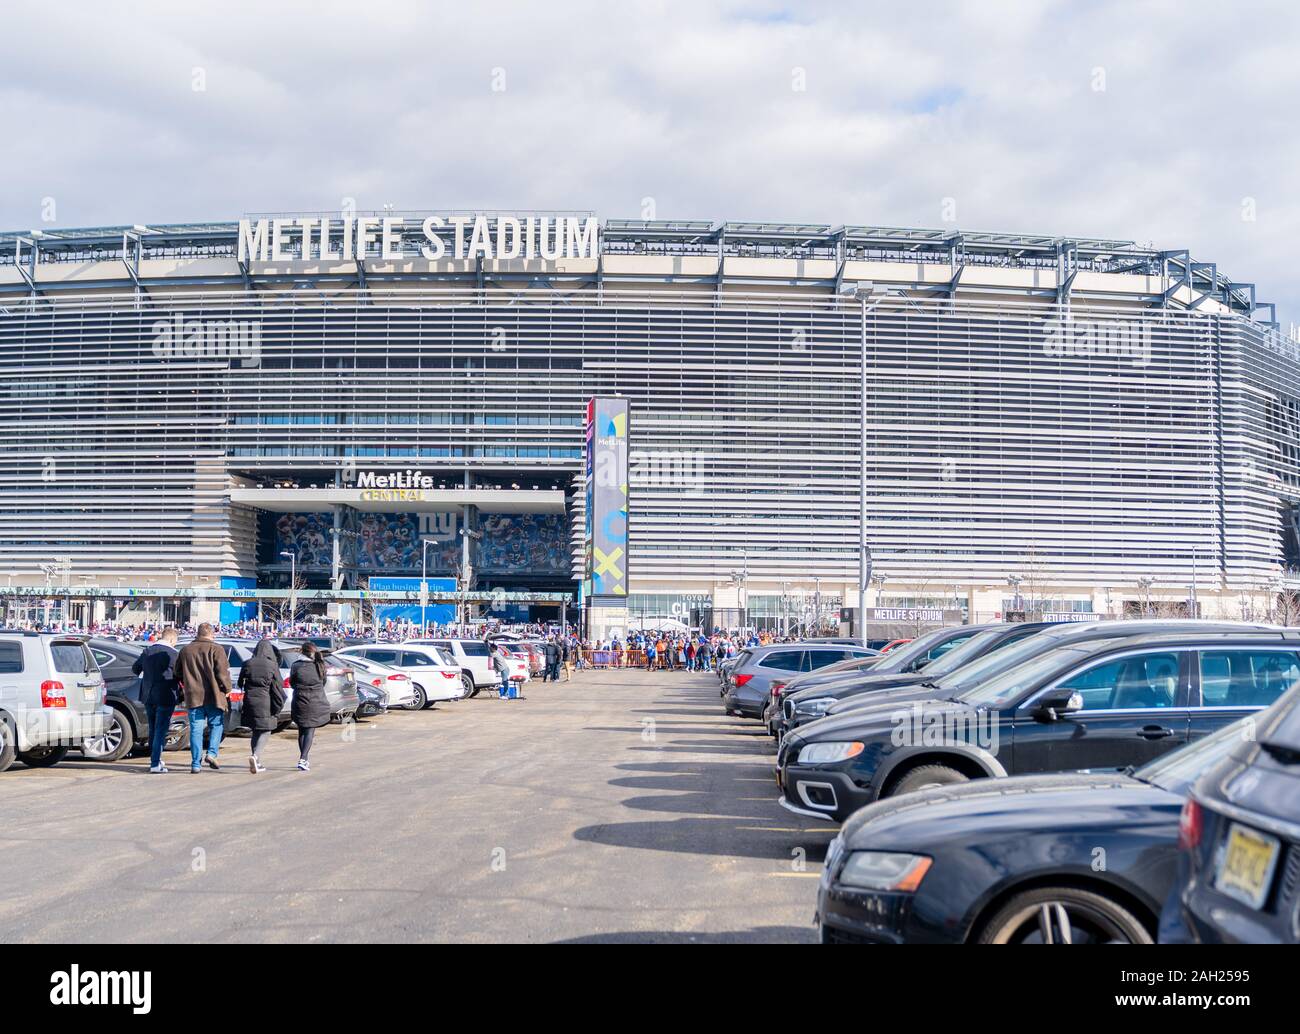 East Rutherford, New Jersey - December 15, 2019: MetLife Stadium Parking Lot During a New York Giants Game. Stock Photo